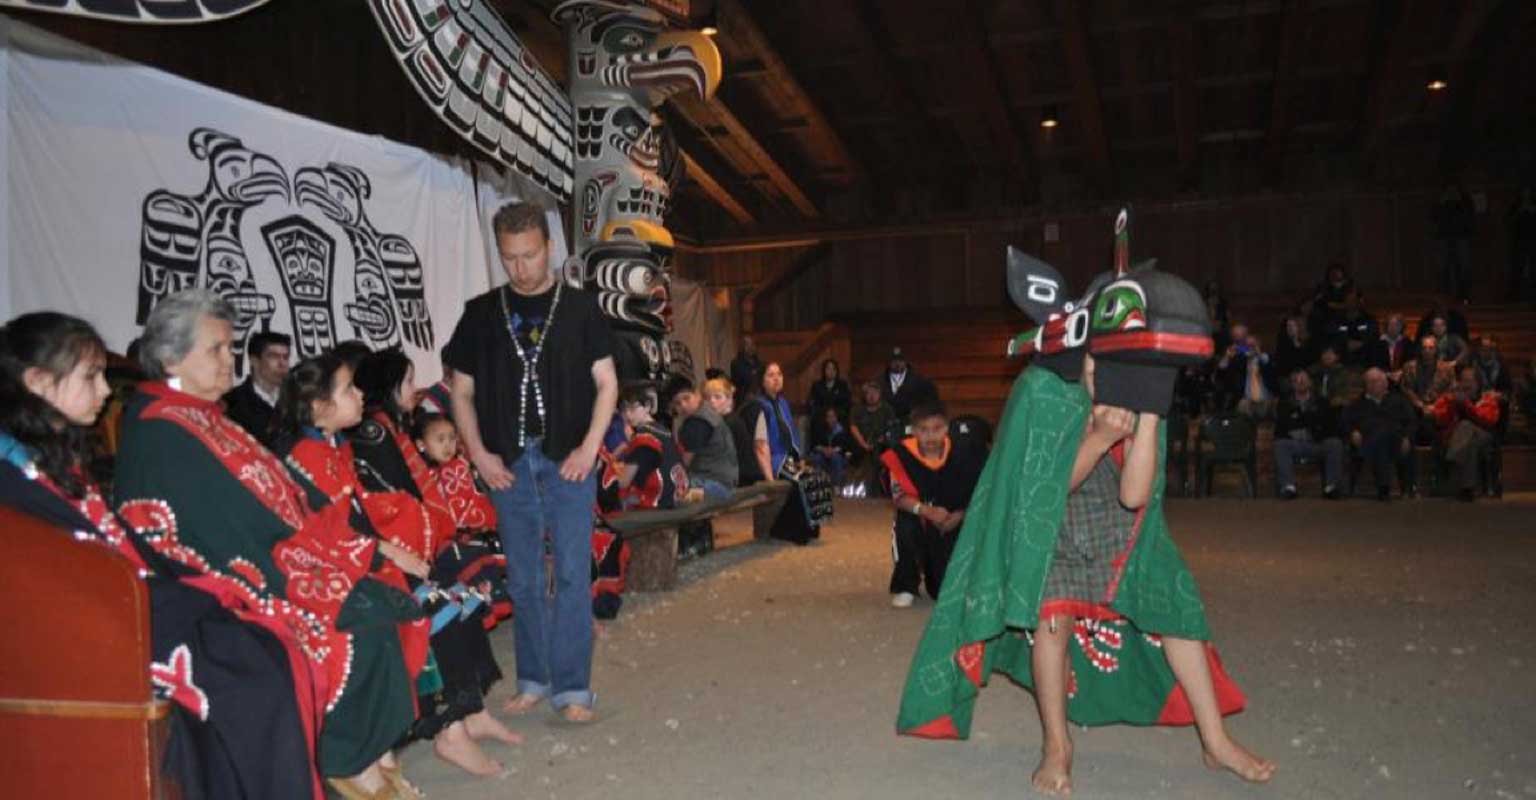 Colour photograph of young Imas Dancer wearing a whale mask and green cape in front of gathered crowd in big house